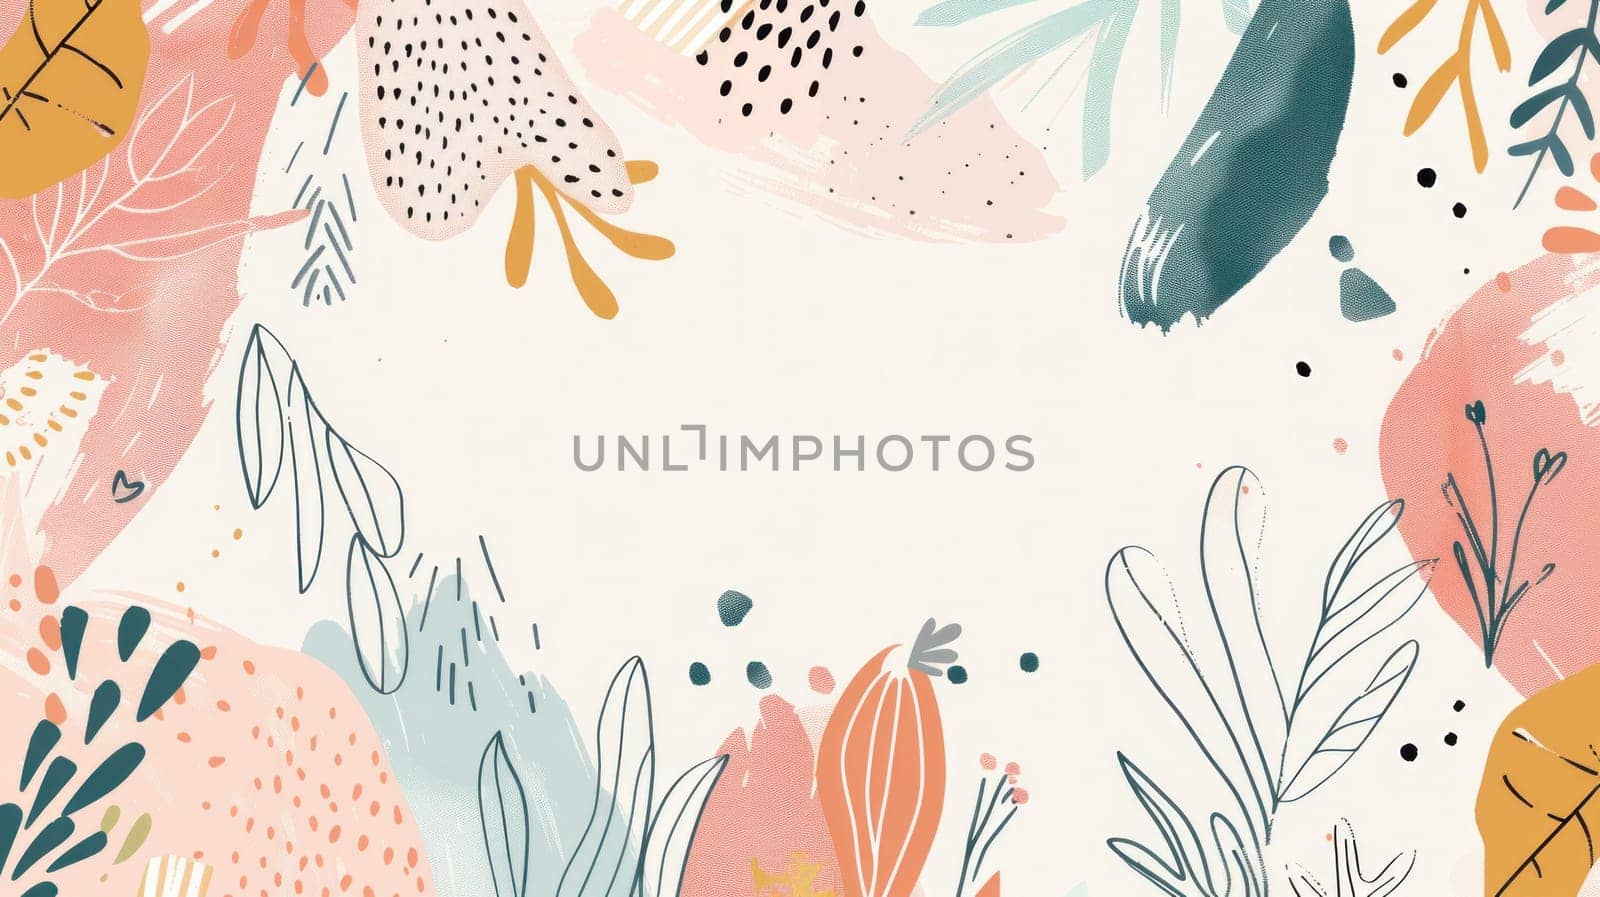 Colorful abstract background with leaves, flowers, and objects in pink, orange, and blue, inspired by nature and beauty